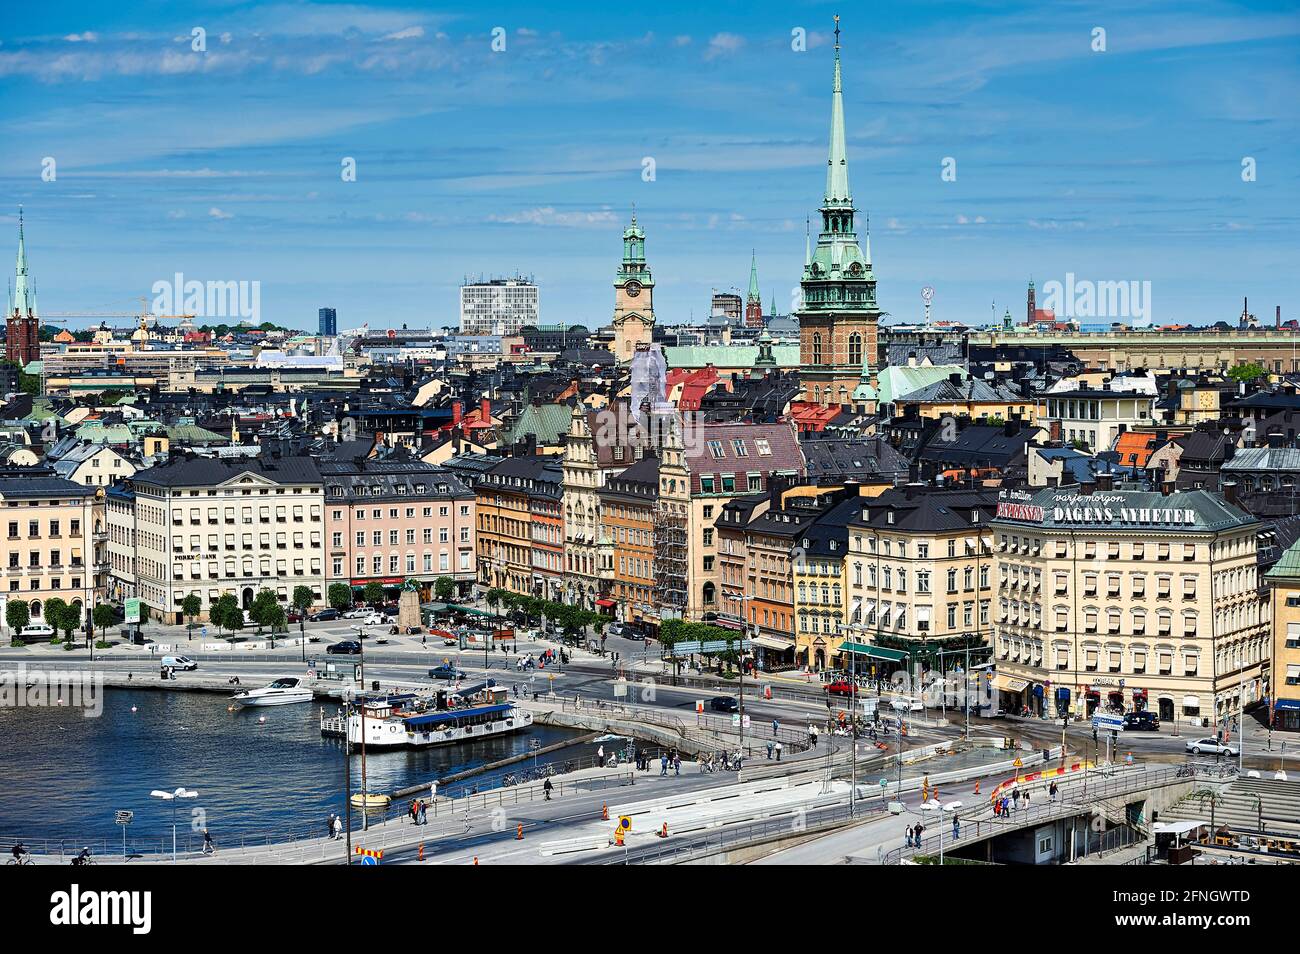 Aerial view of Stockholm old town. Riddarholmen Island. Sweden Stock Photo